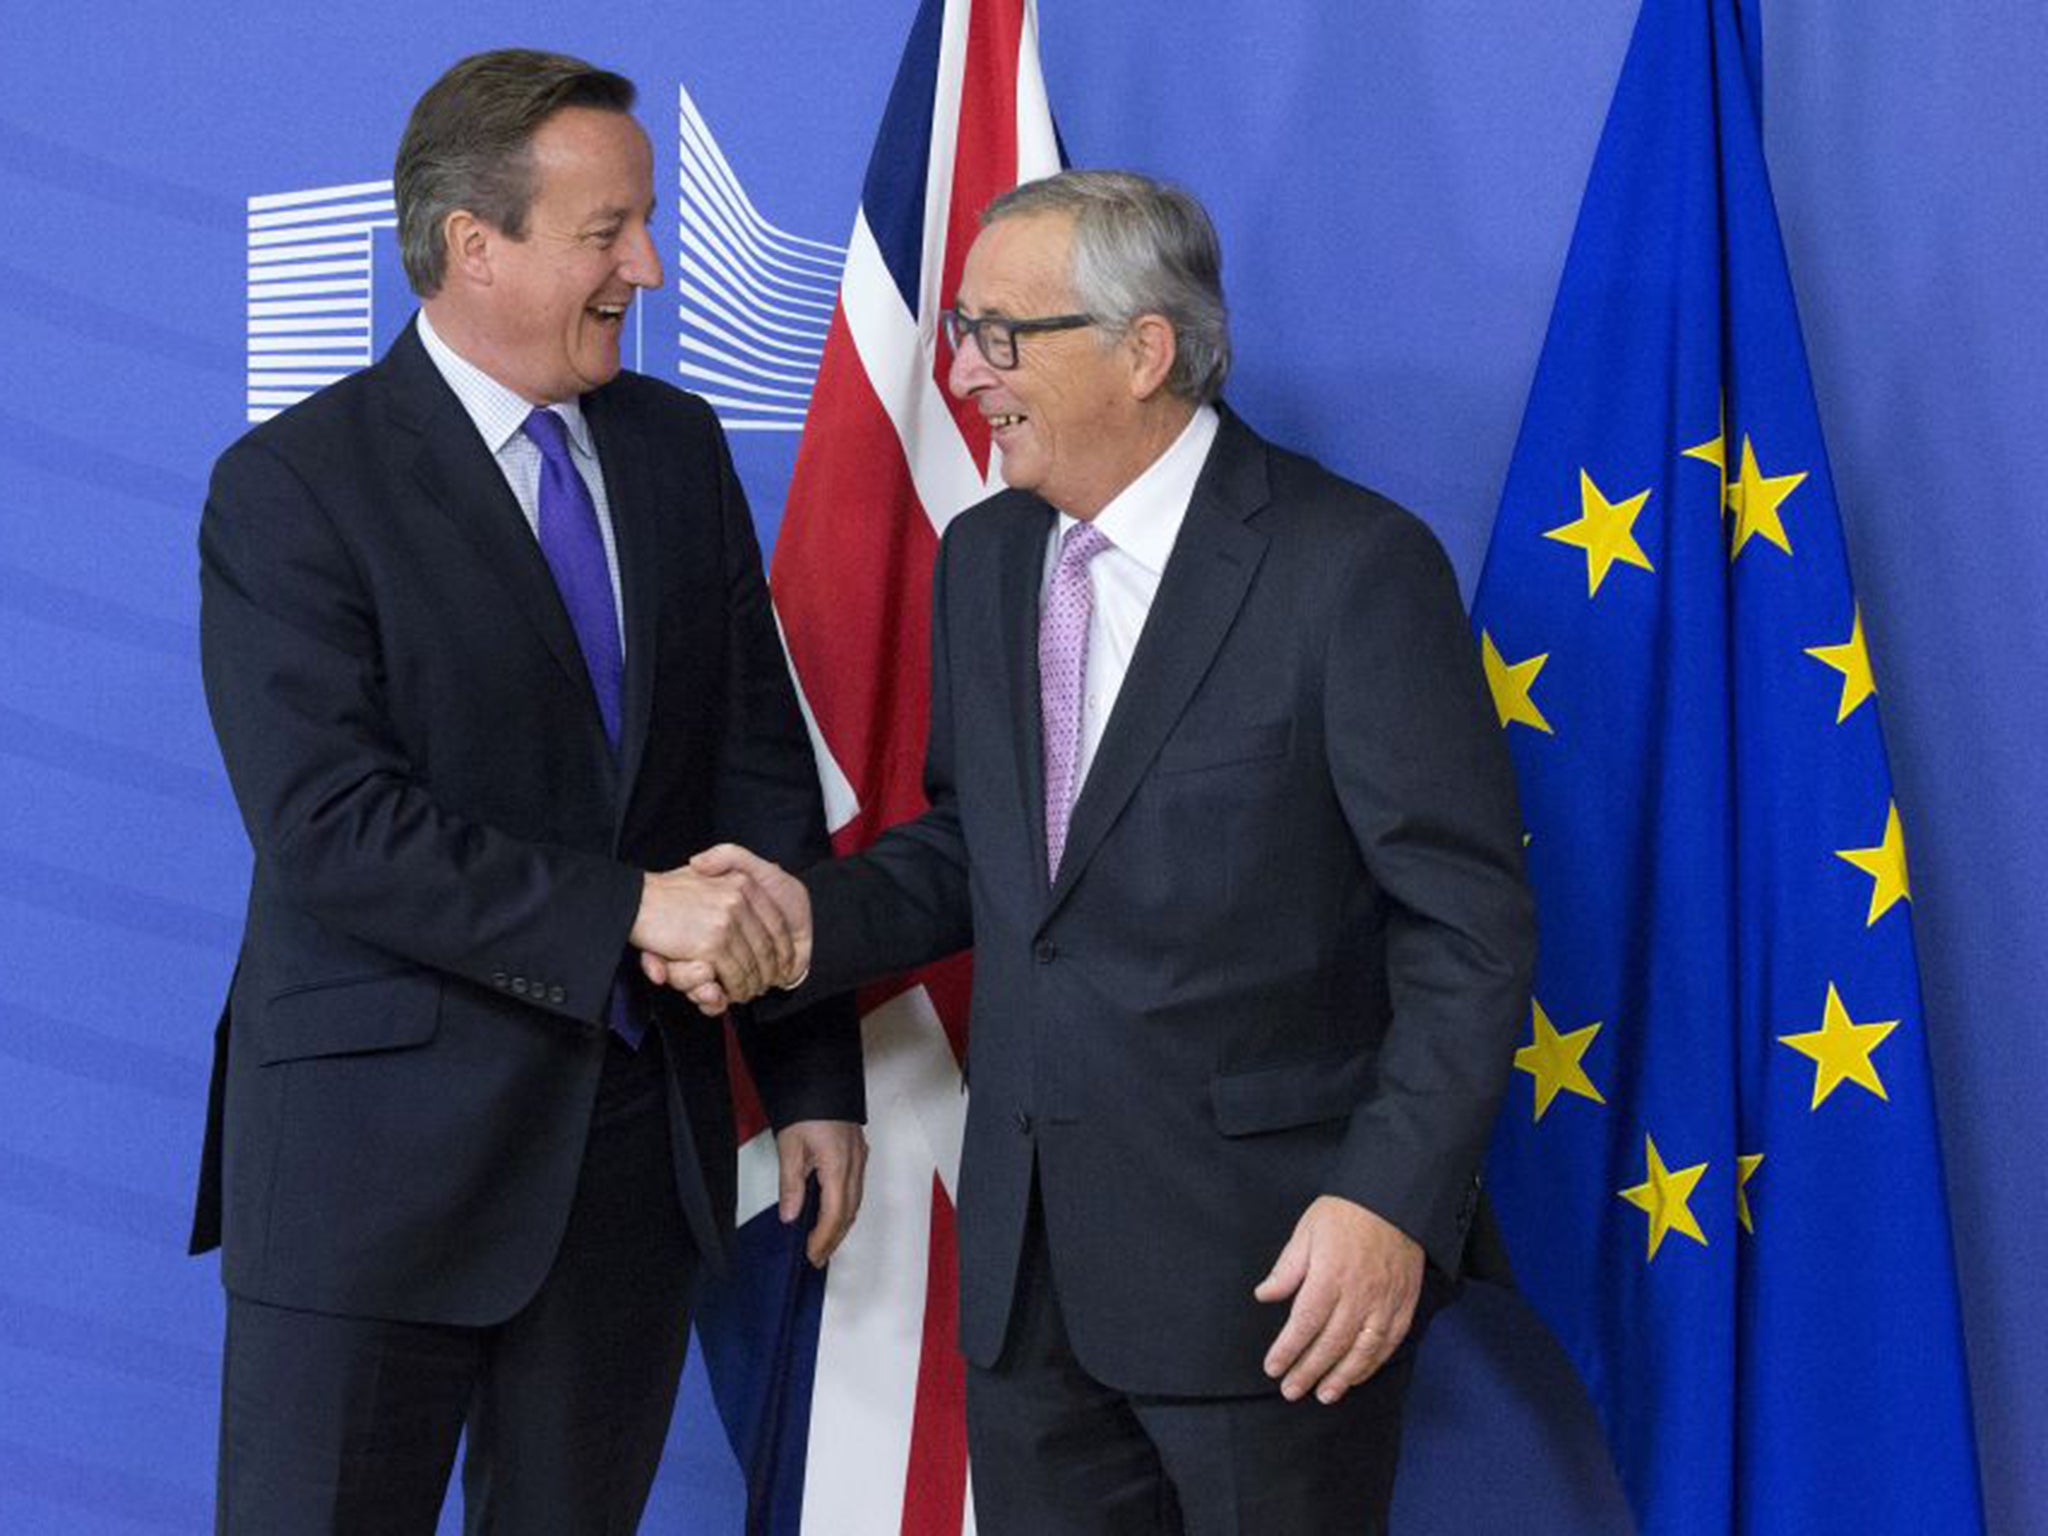 Following a meeting with European Commission President Jean-Claude Juncker, David Cameron said he was confident of getting a good deal for Britain